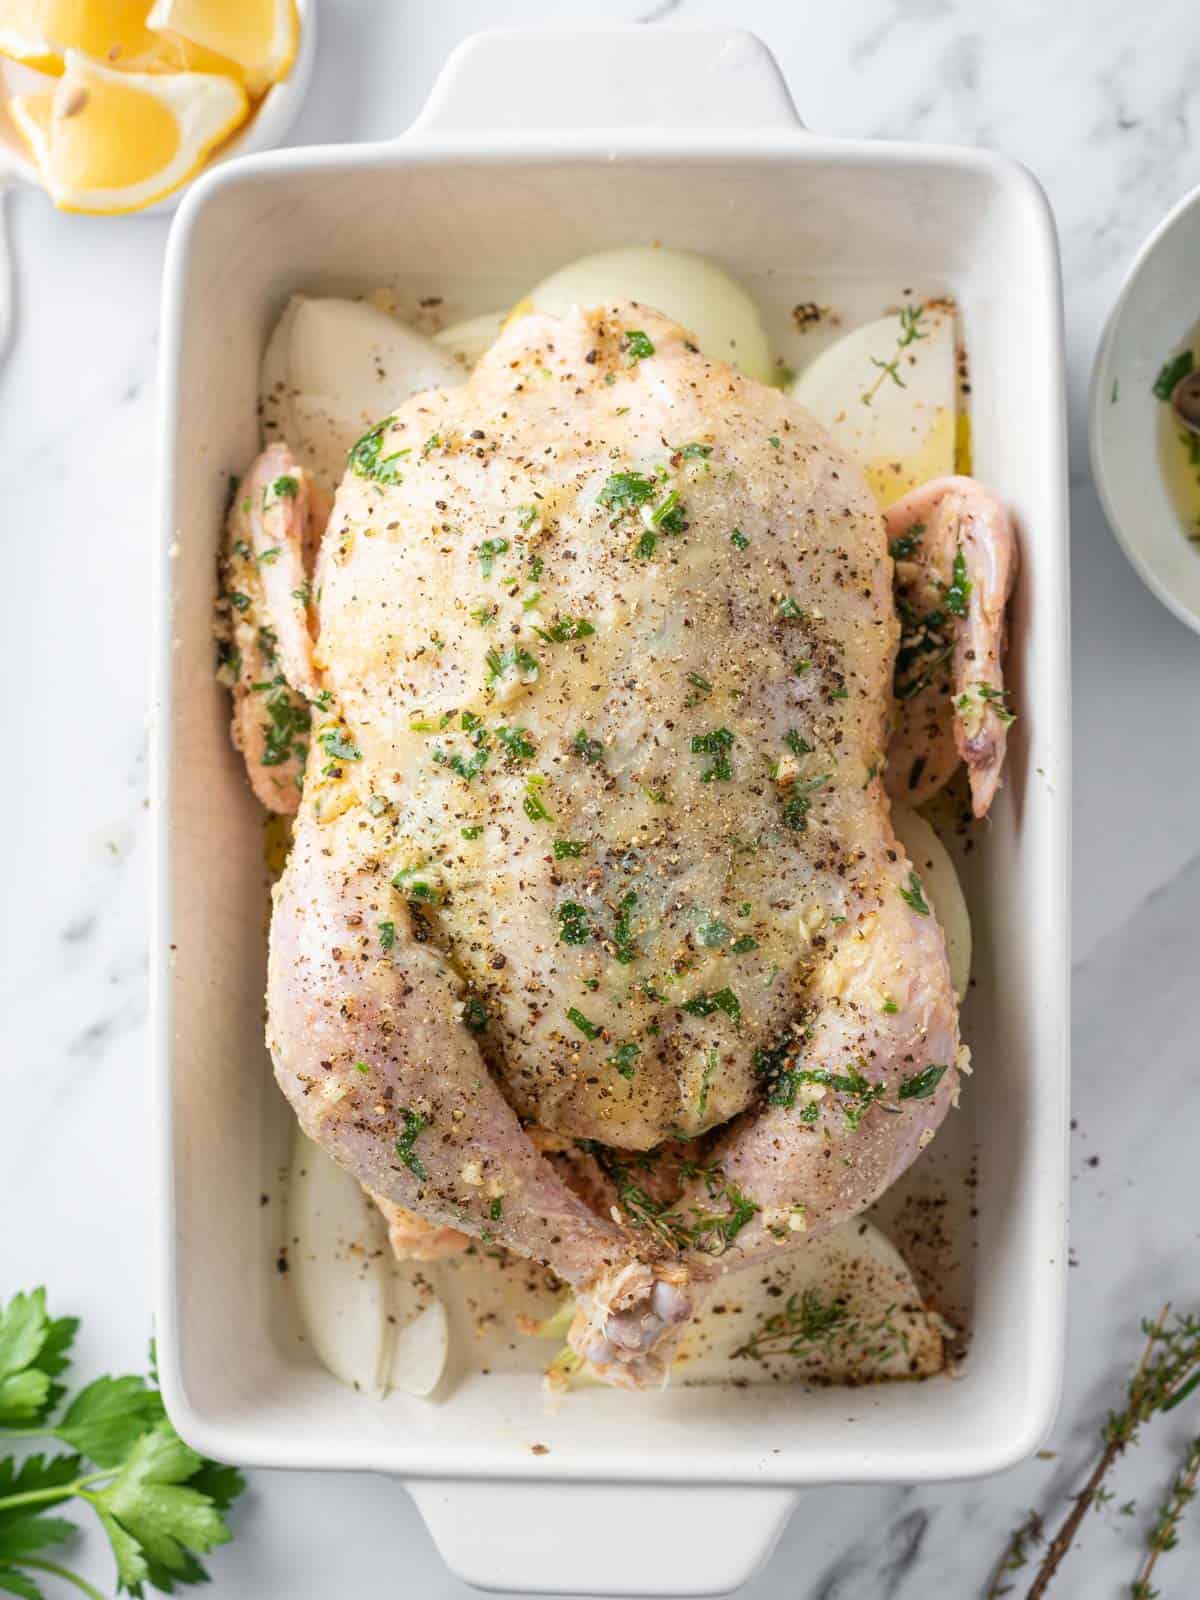 Whole chicken rubbed with herbs and butter.